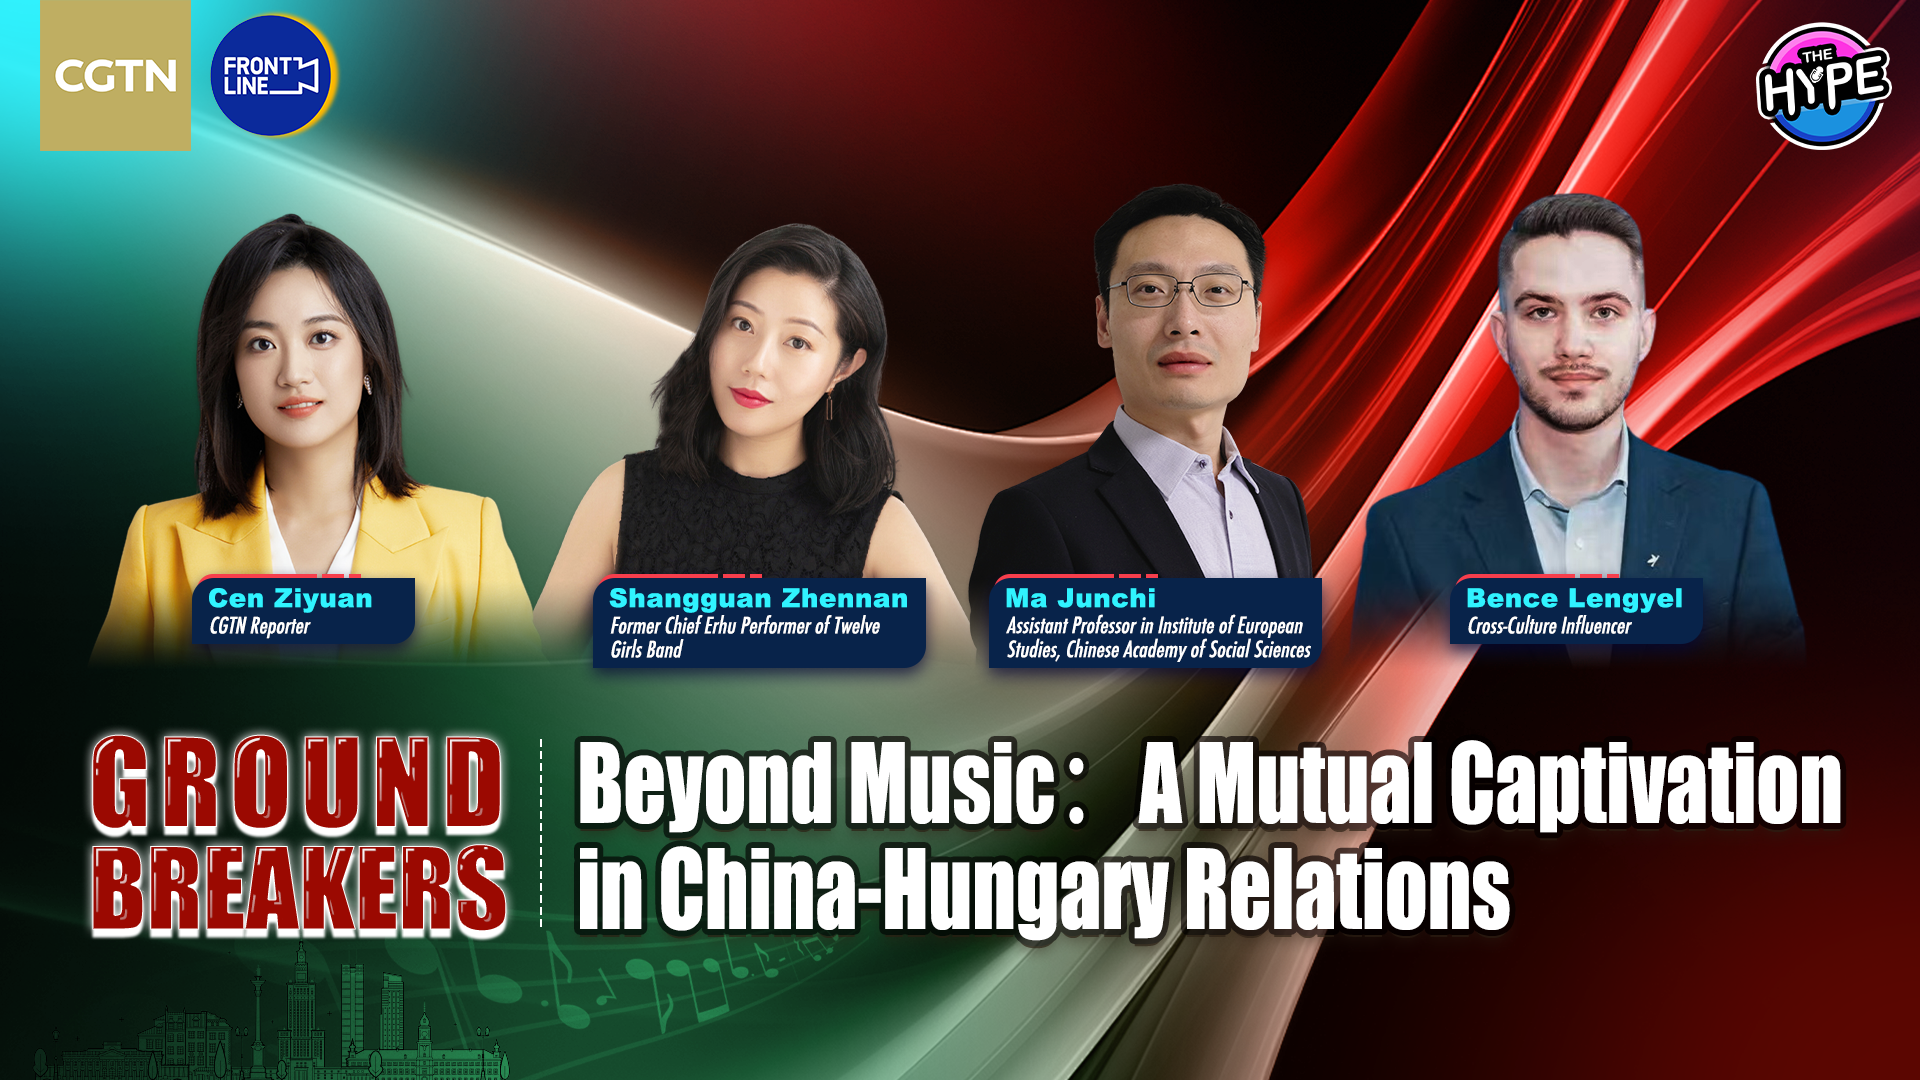 Watch: Beyond music – A mutual captivation in China-Hungary relations